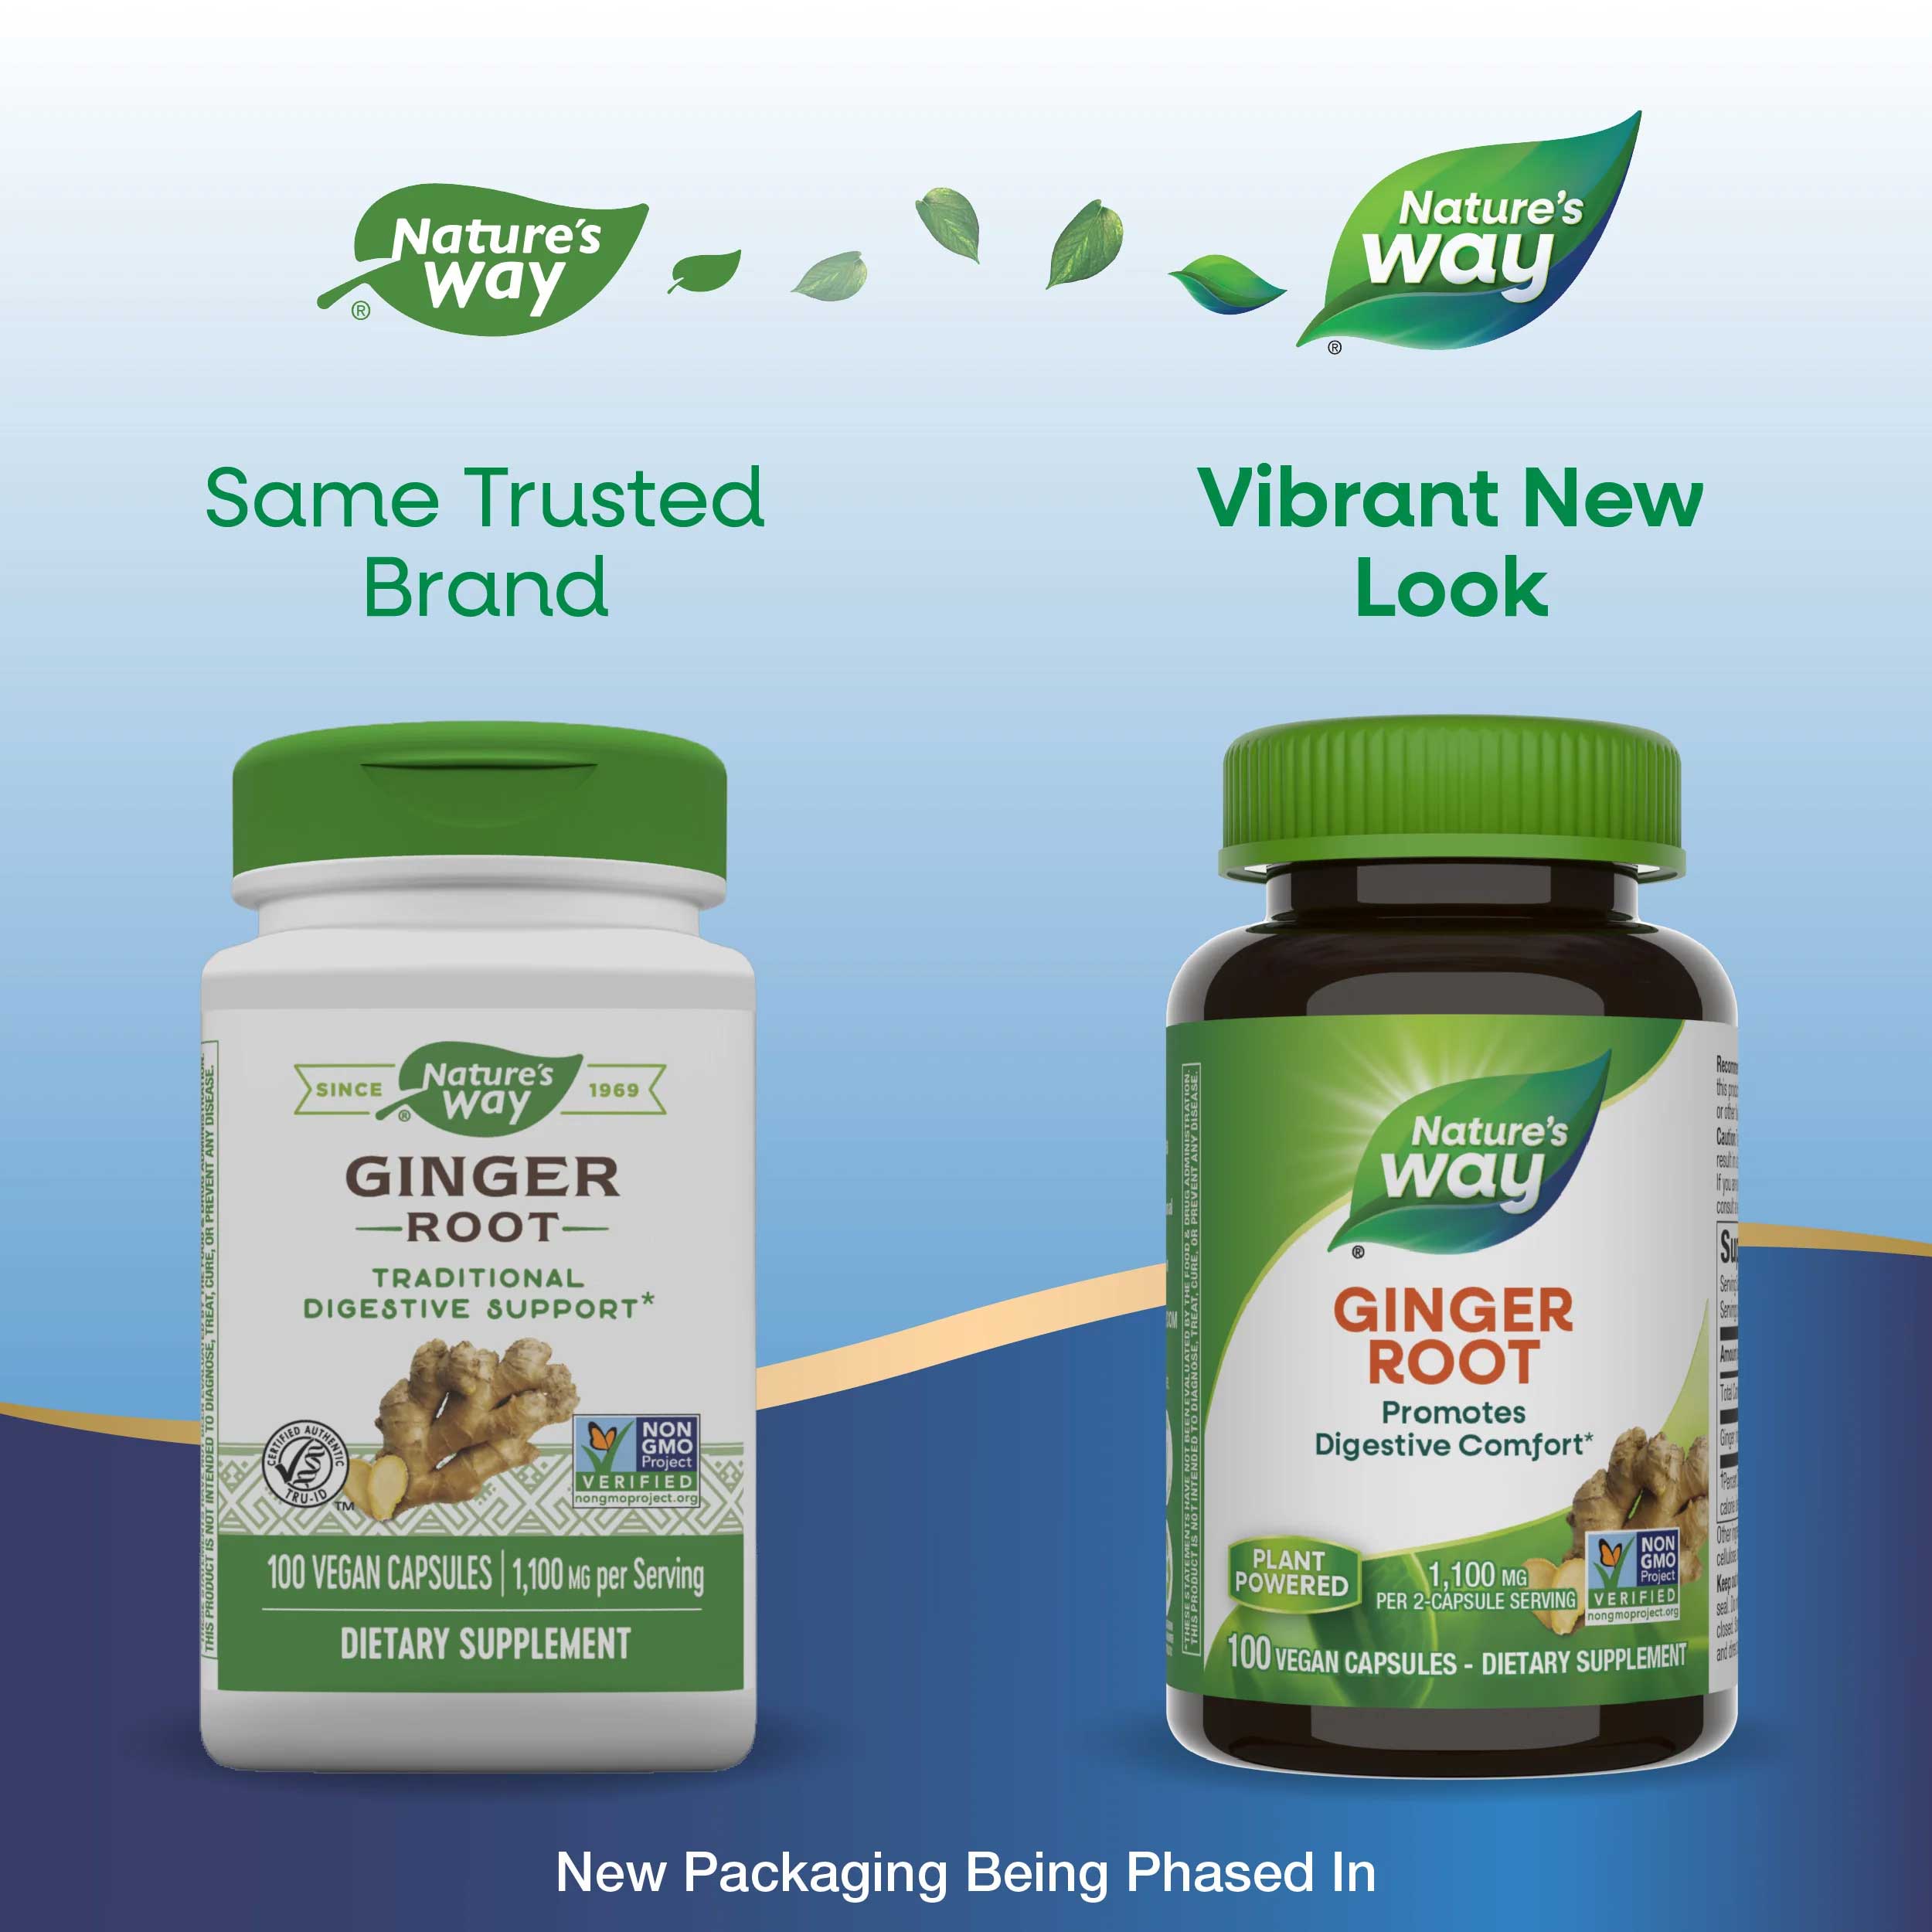 Nature's Way Ginger Root New Look